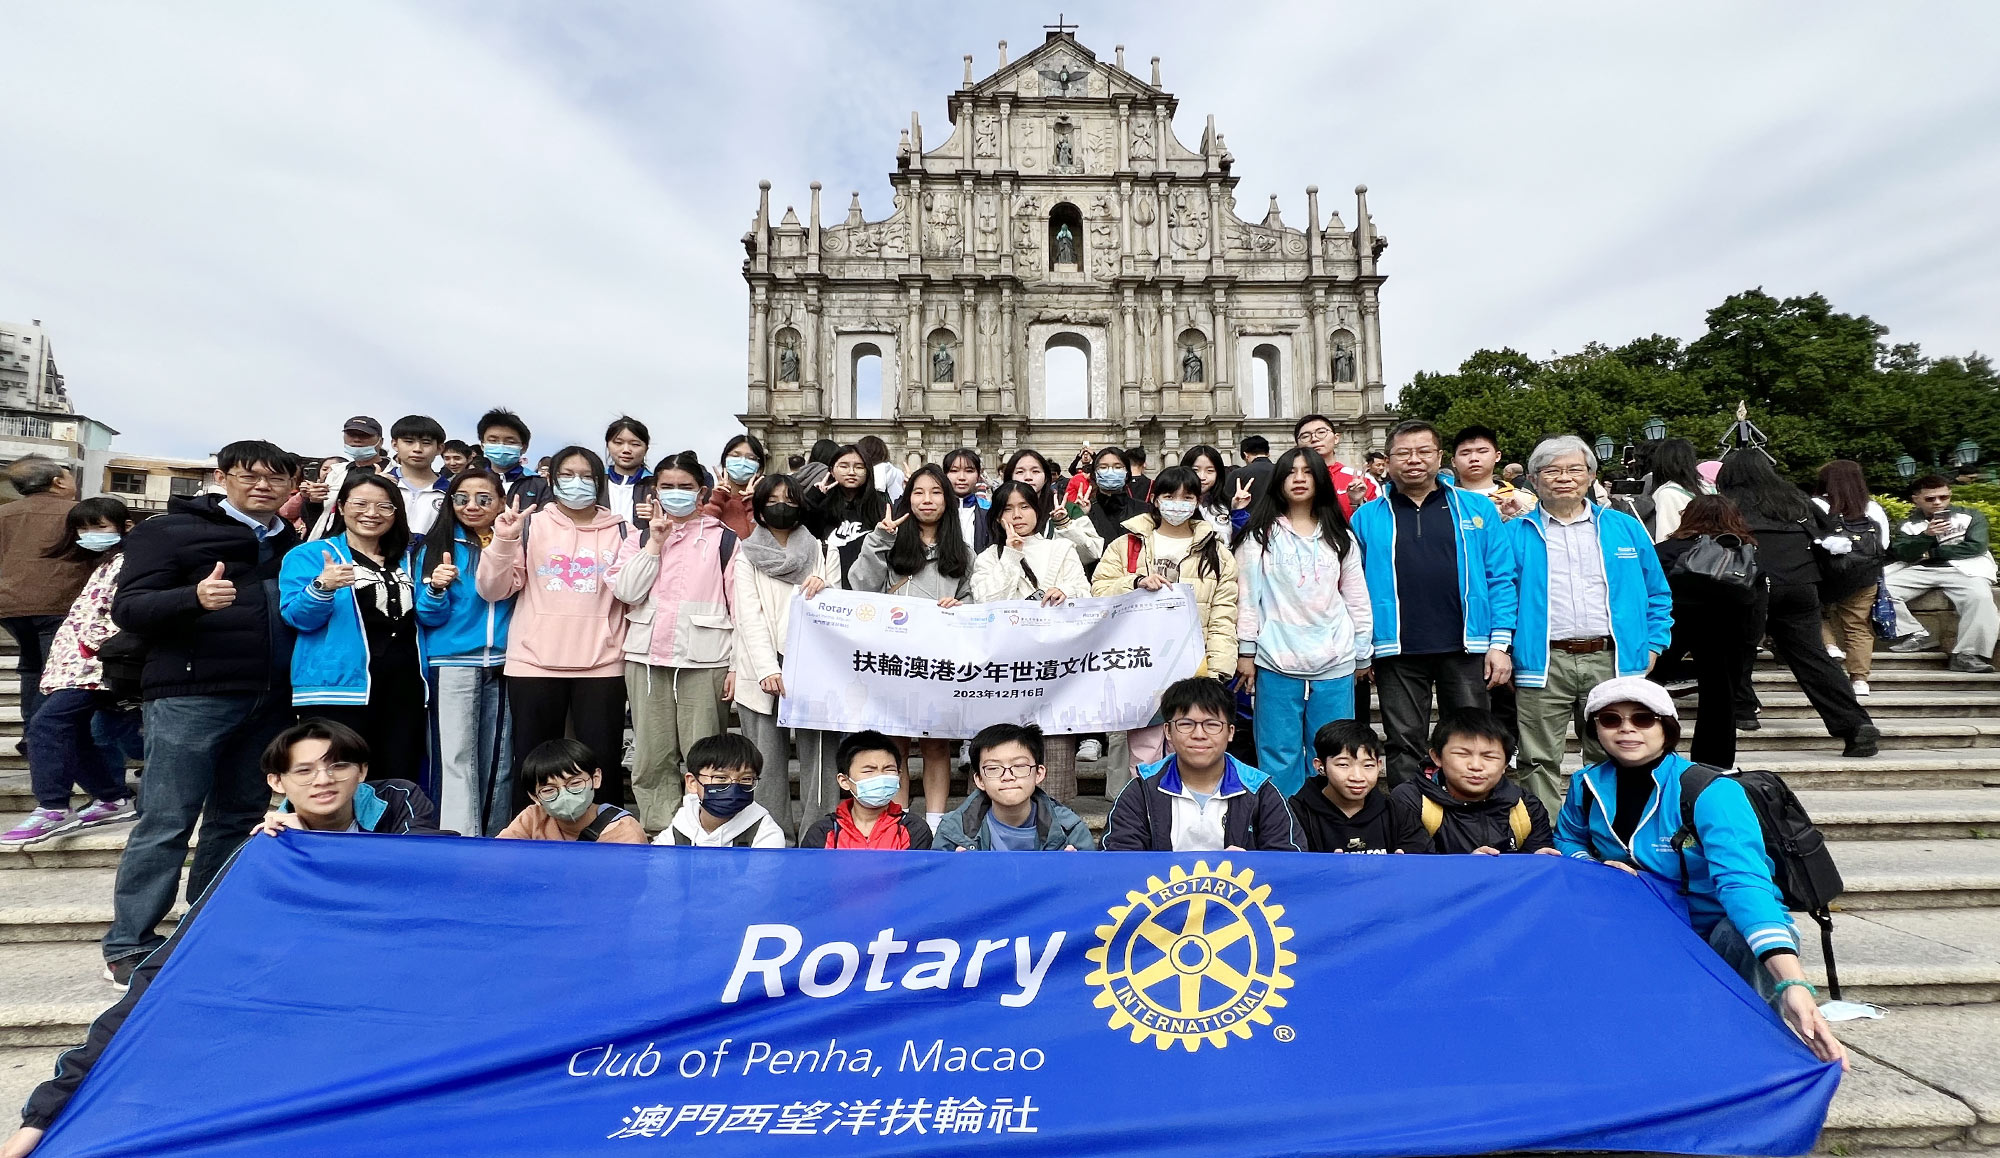 Cultural Exchange Tour for youth by Rotary Club of Penha, Macau 